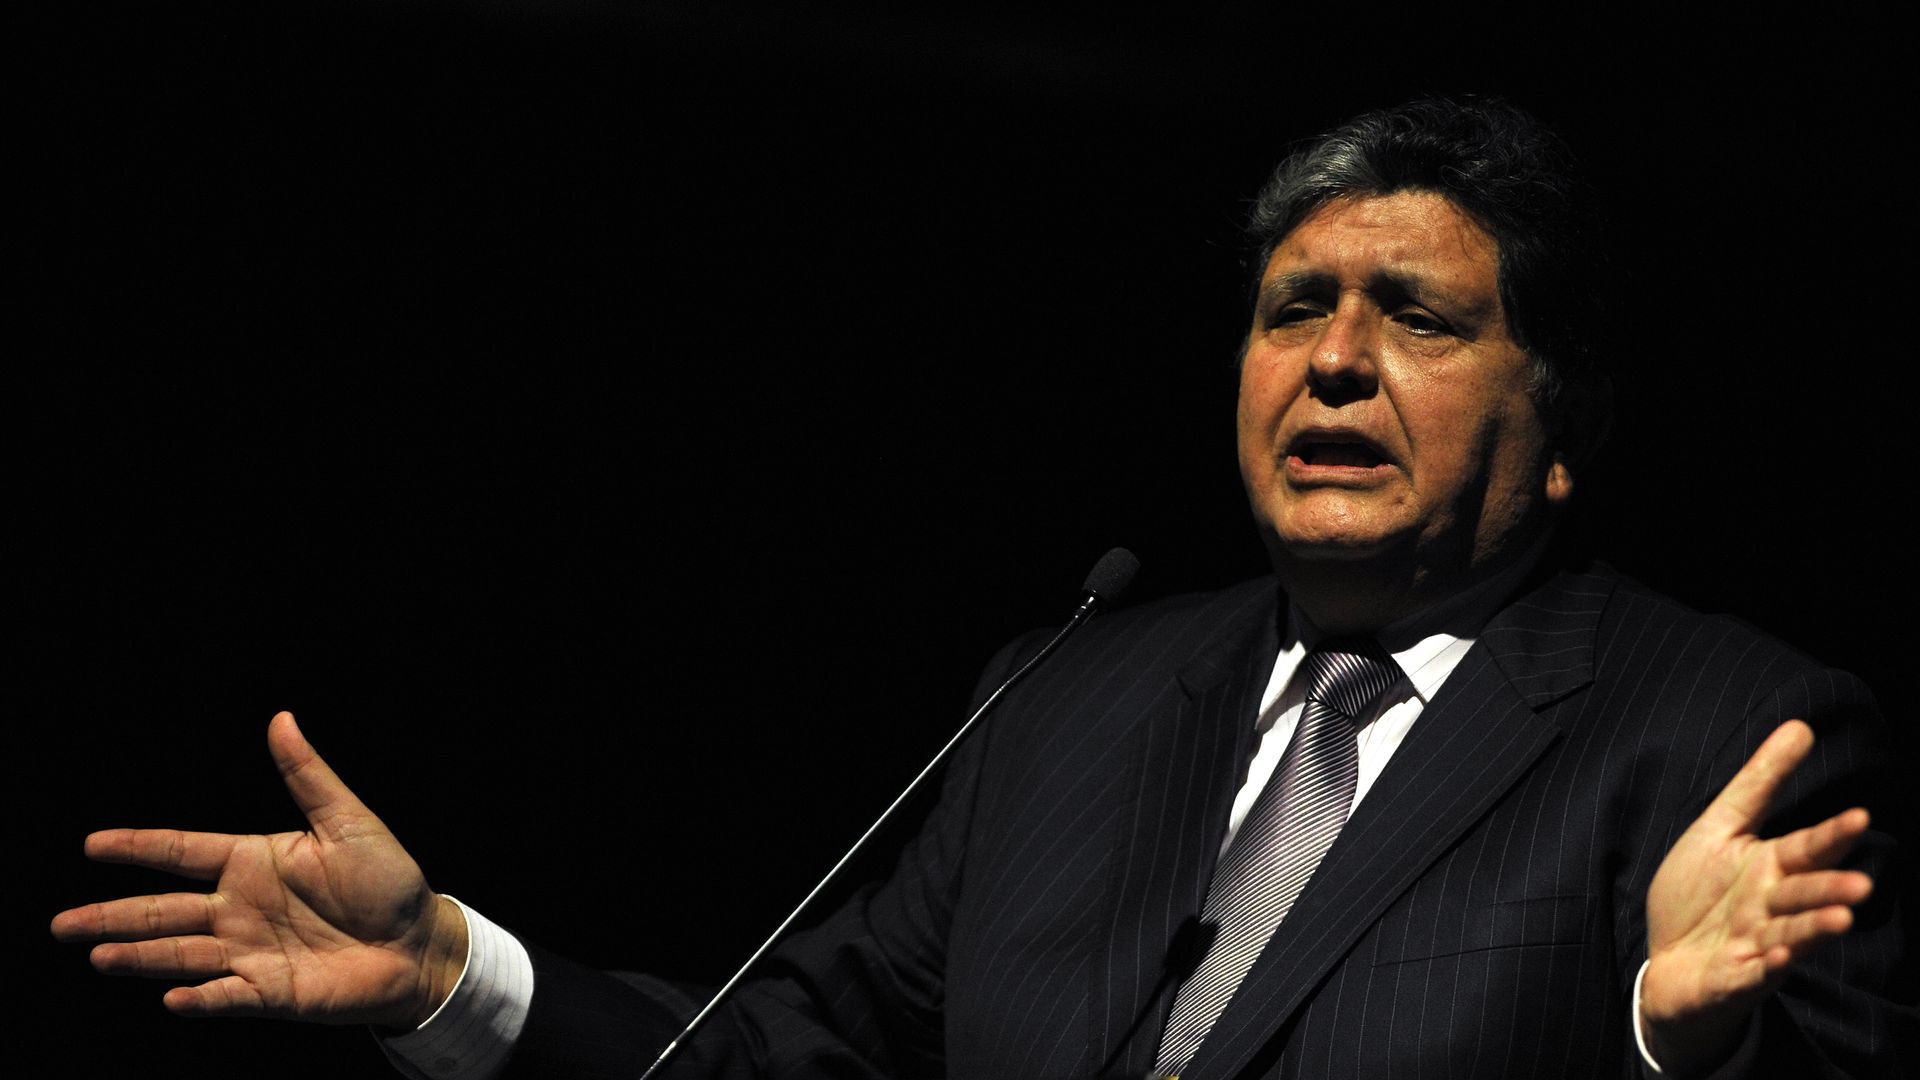 The former president of Peru, Alan Garcia, speaks during the First International Meeting of the Pacific Basin